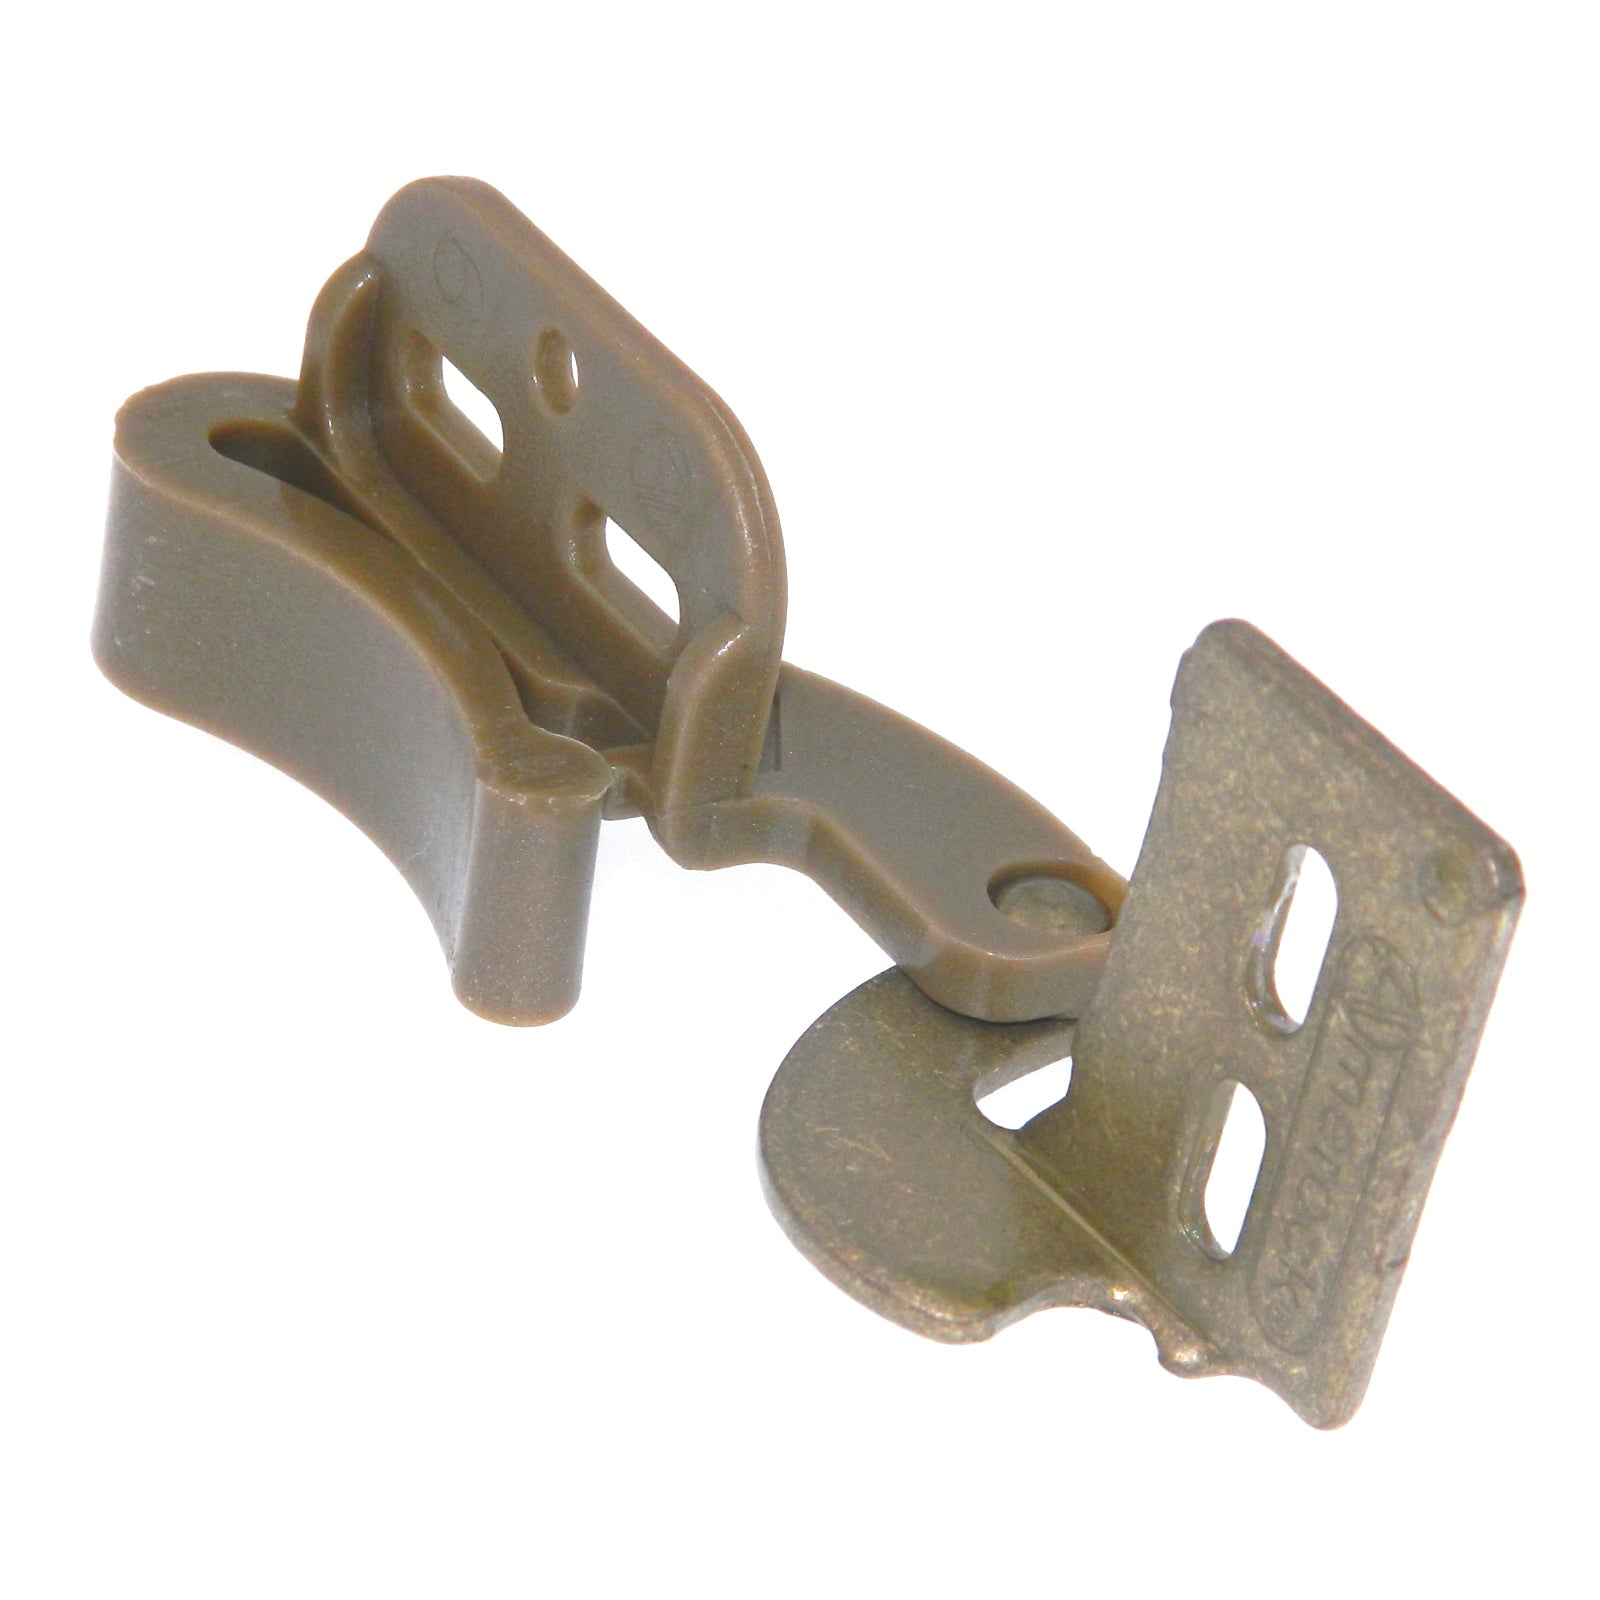 Pair of Amerock BP2606-BB Burnished Brass 1/2" Overlay Self-Latch Knife Hinges